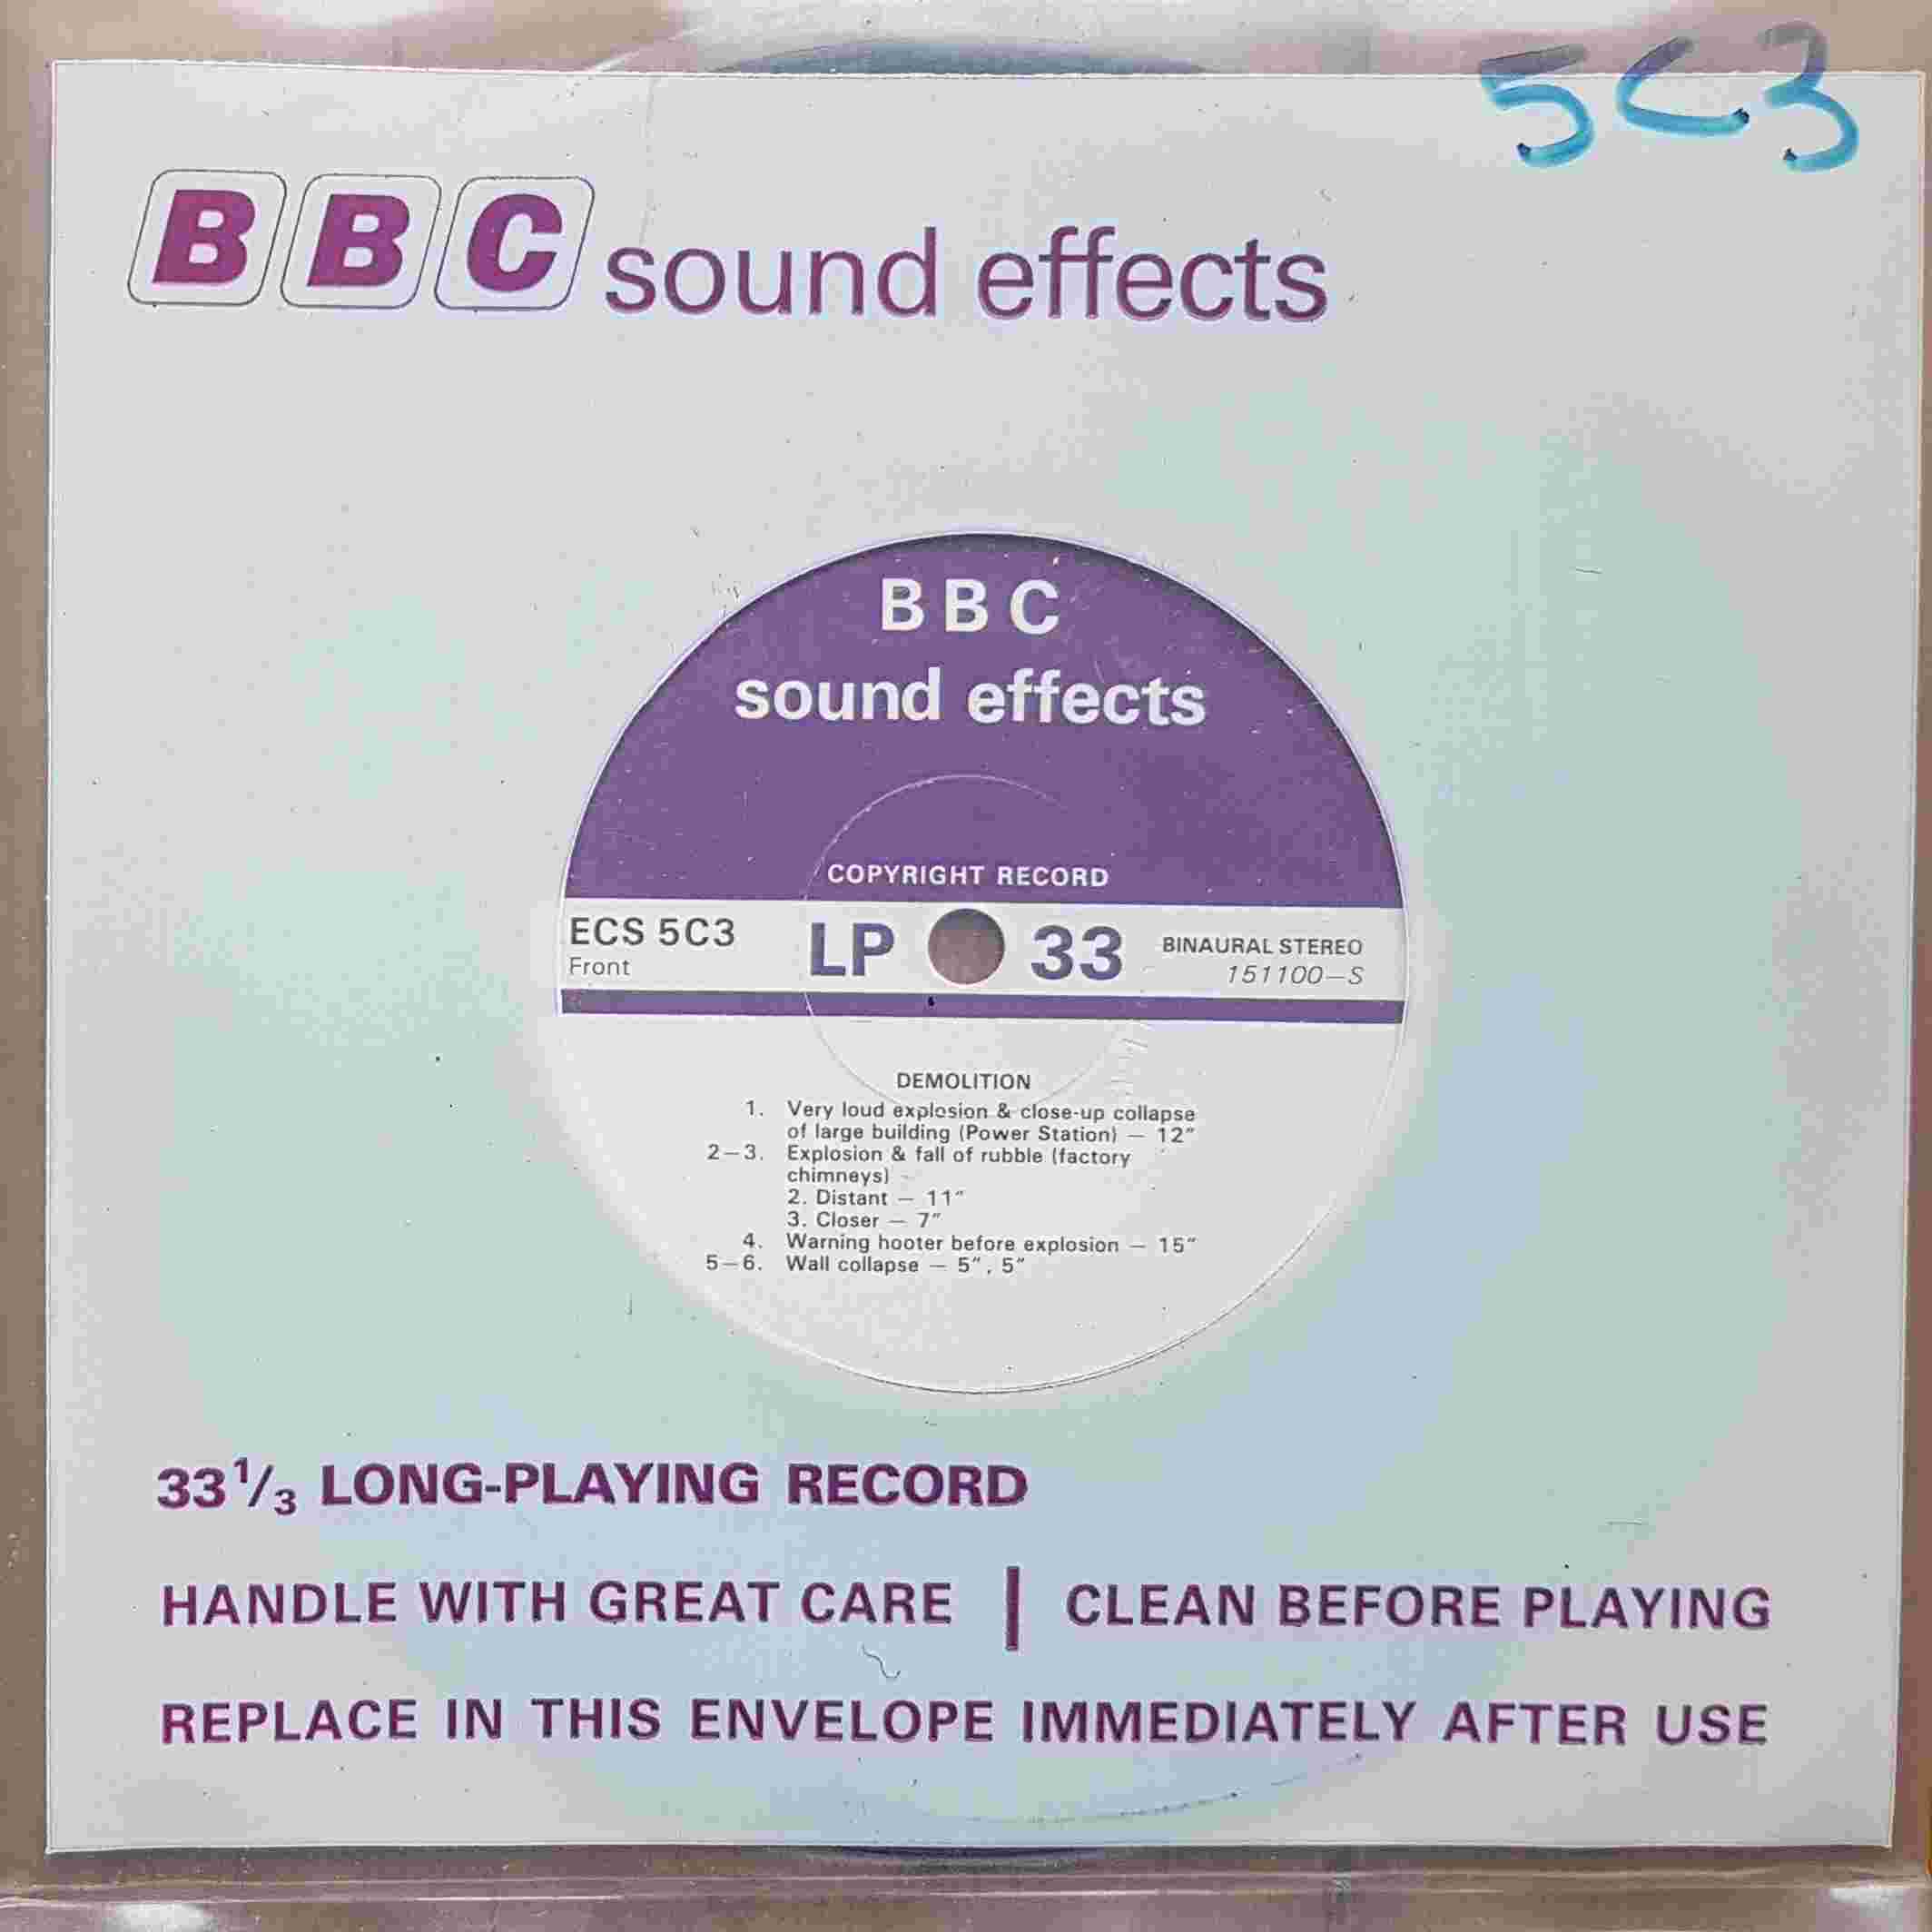 Picture of ECS 5C3 Demolition by artist Not registered from the BBC records and Tapes library